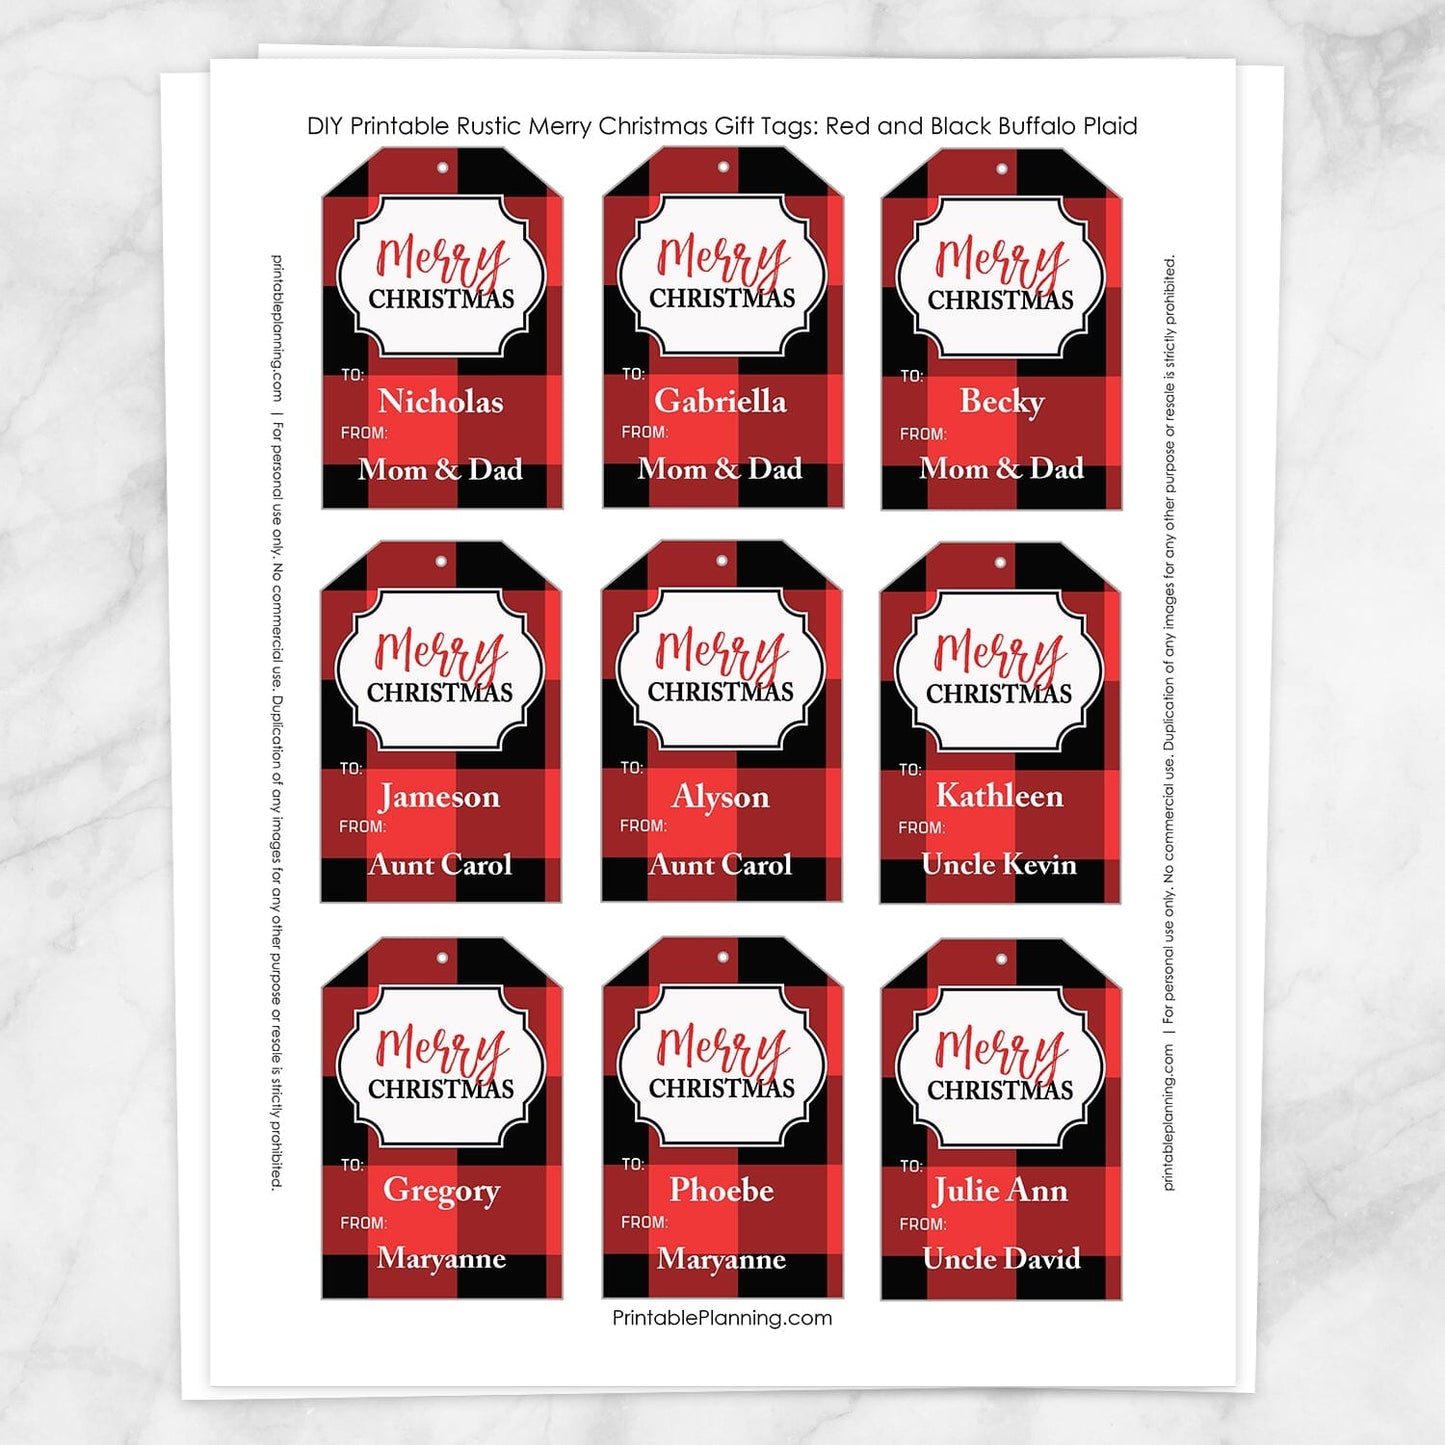 Printable Personalized Red Buffalo Plaid Merry Christmas Gift Tags at Printable Planning. Sheet of 9 gift tags,